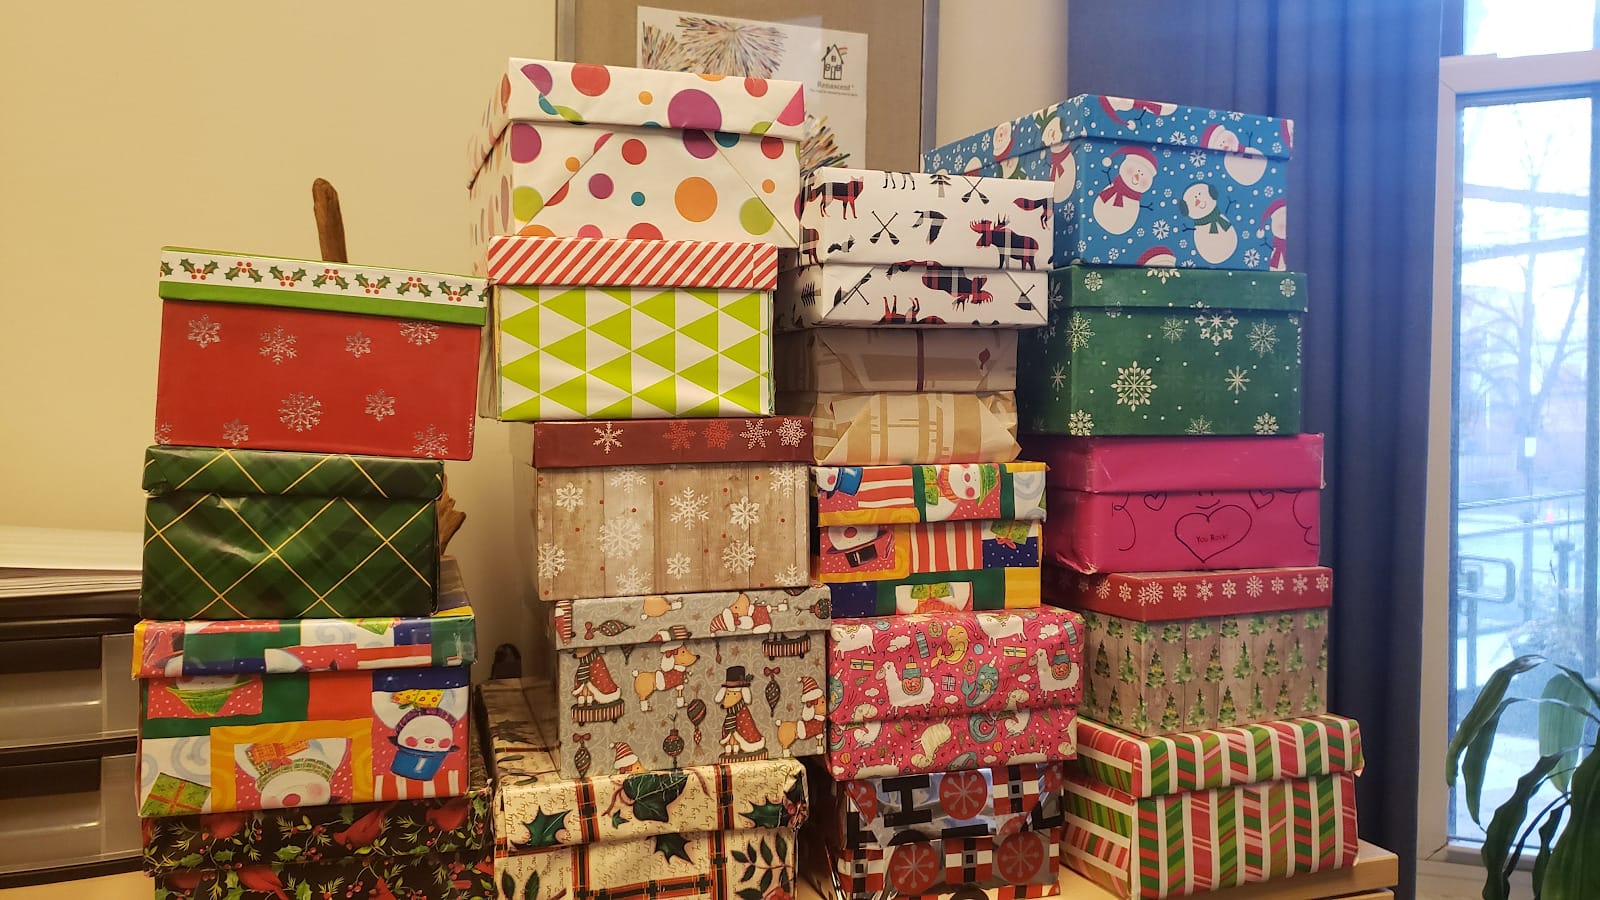 Presents wrapped and stacked up.